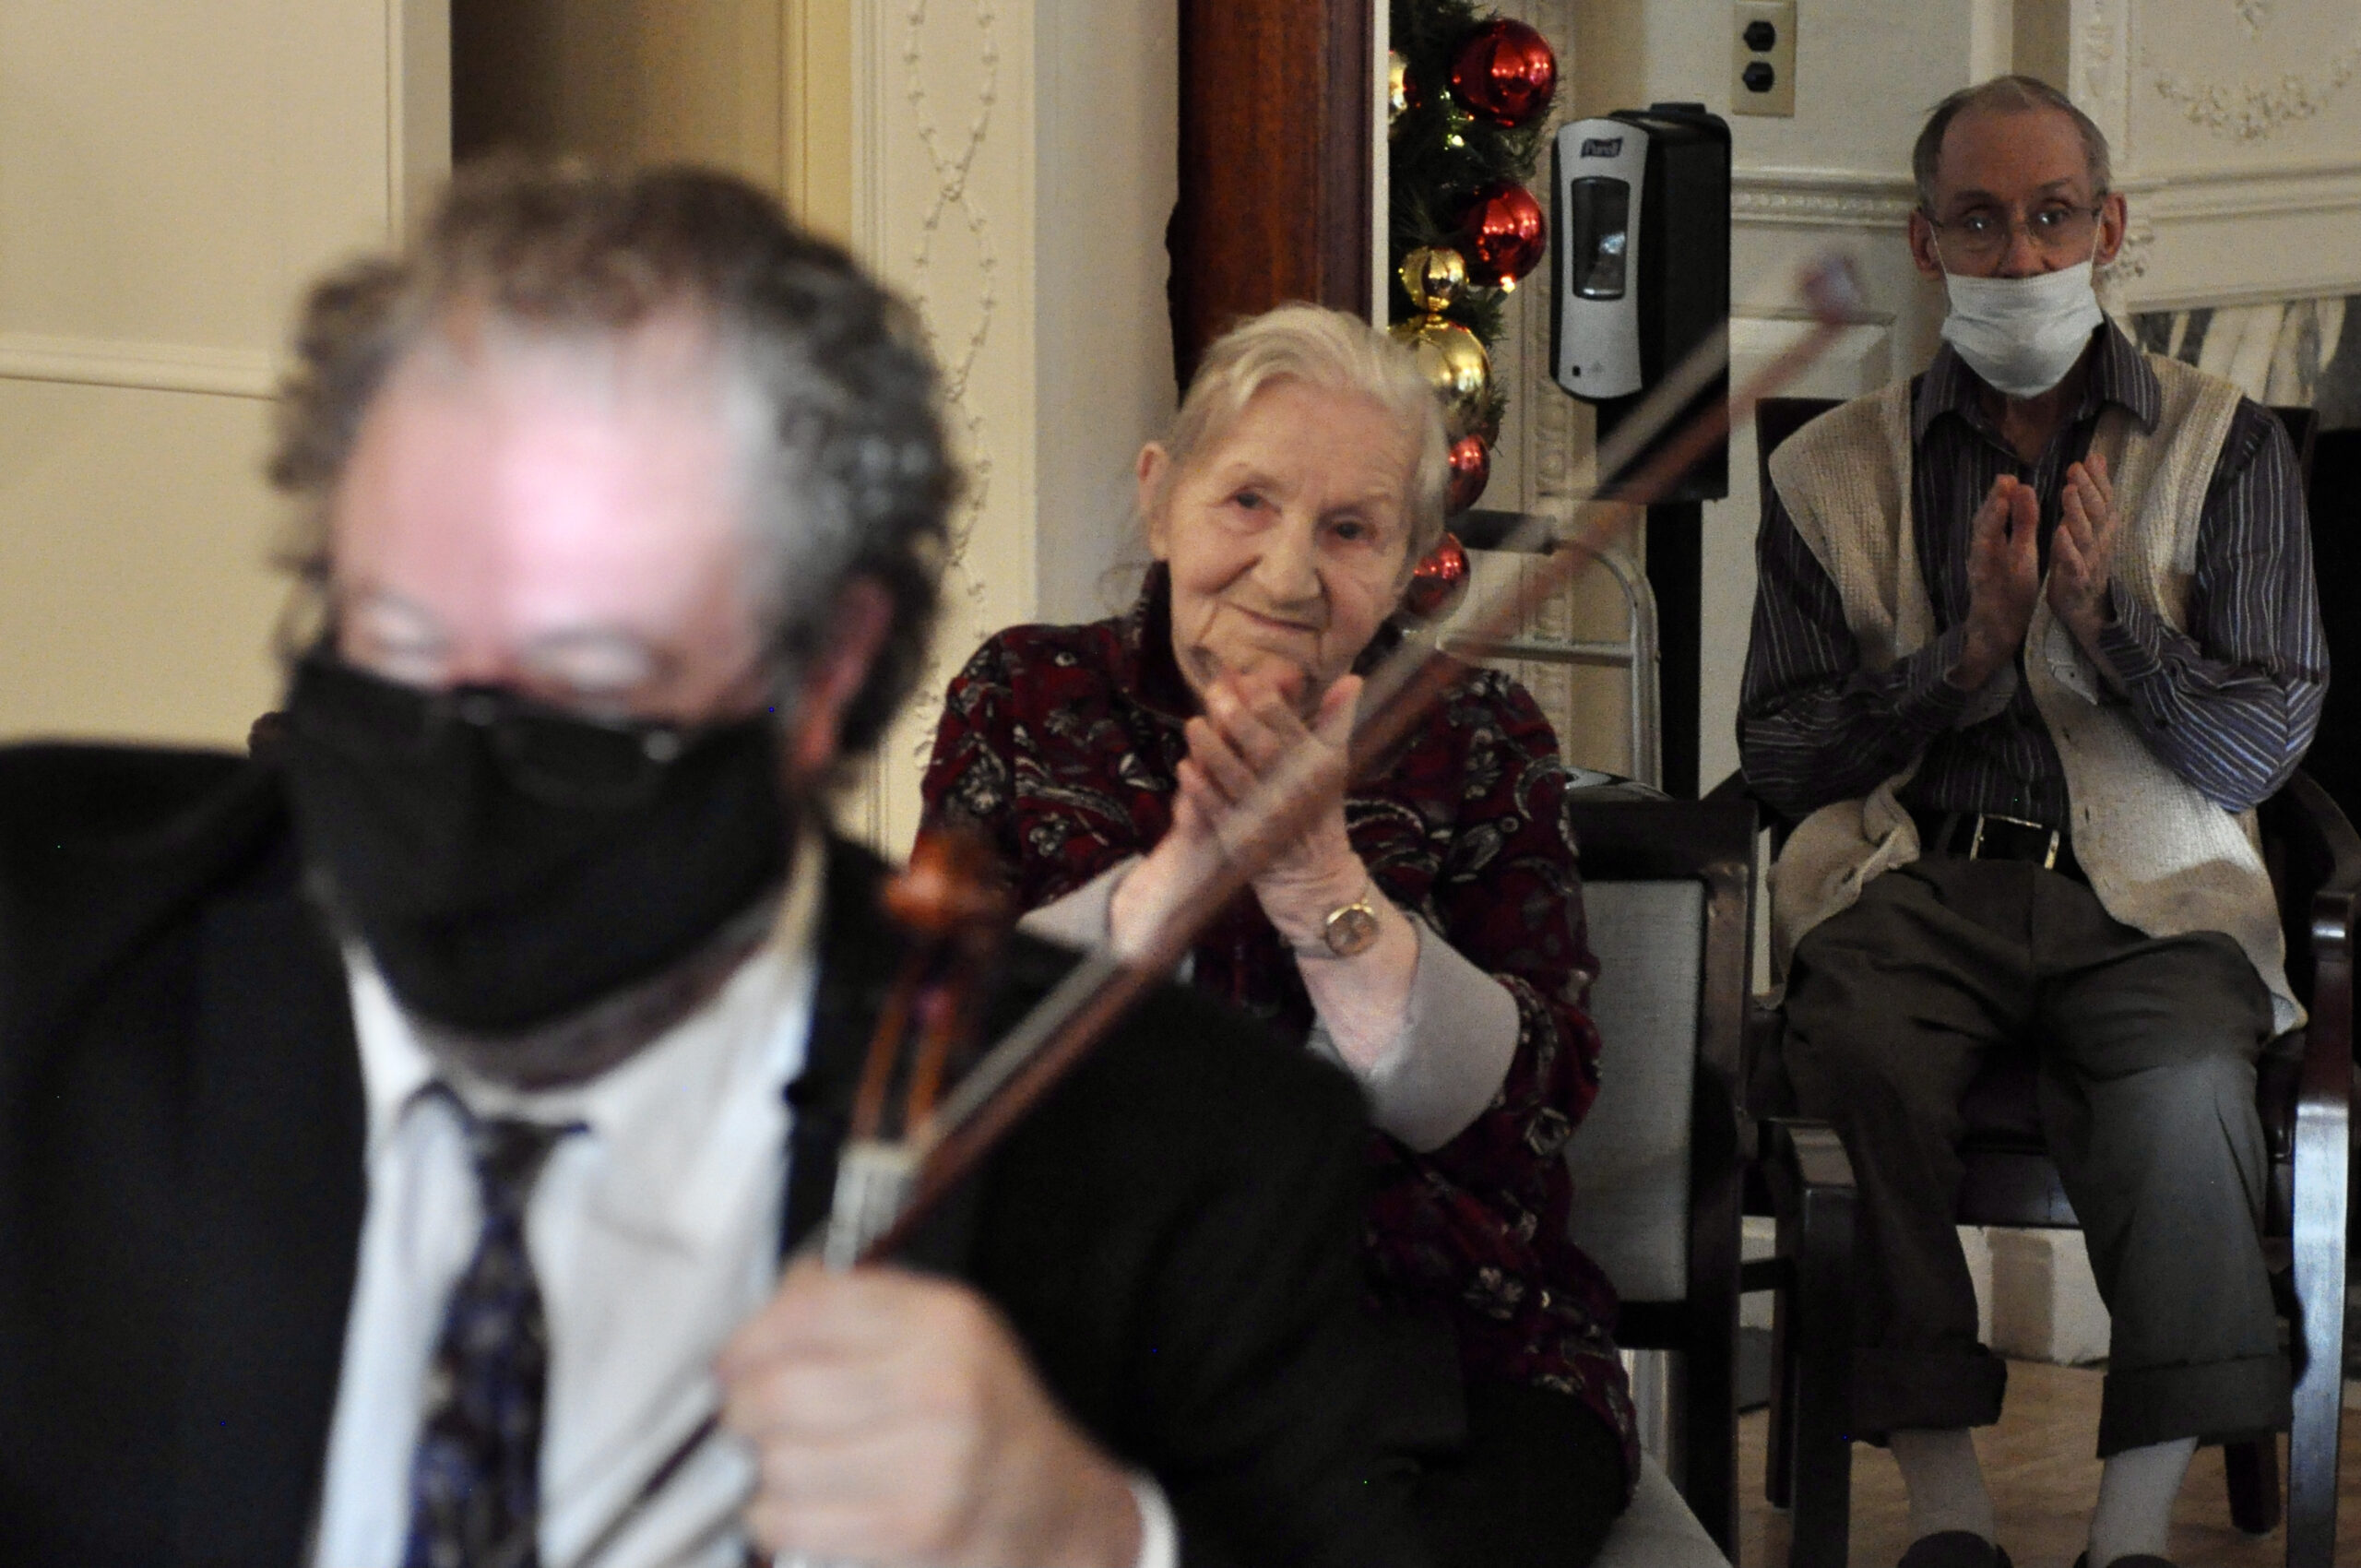 Resident of a facility for Music and Memory applauds as a member of Landmarks String Quartet plays.